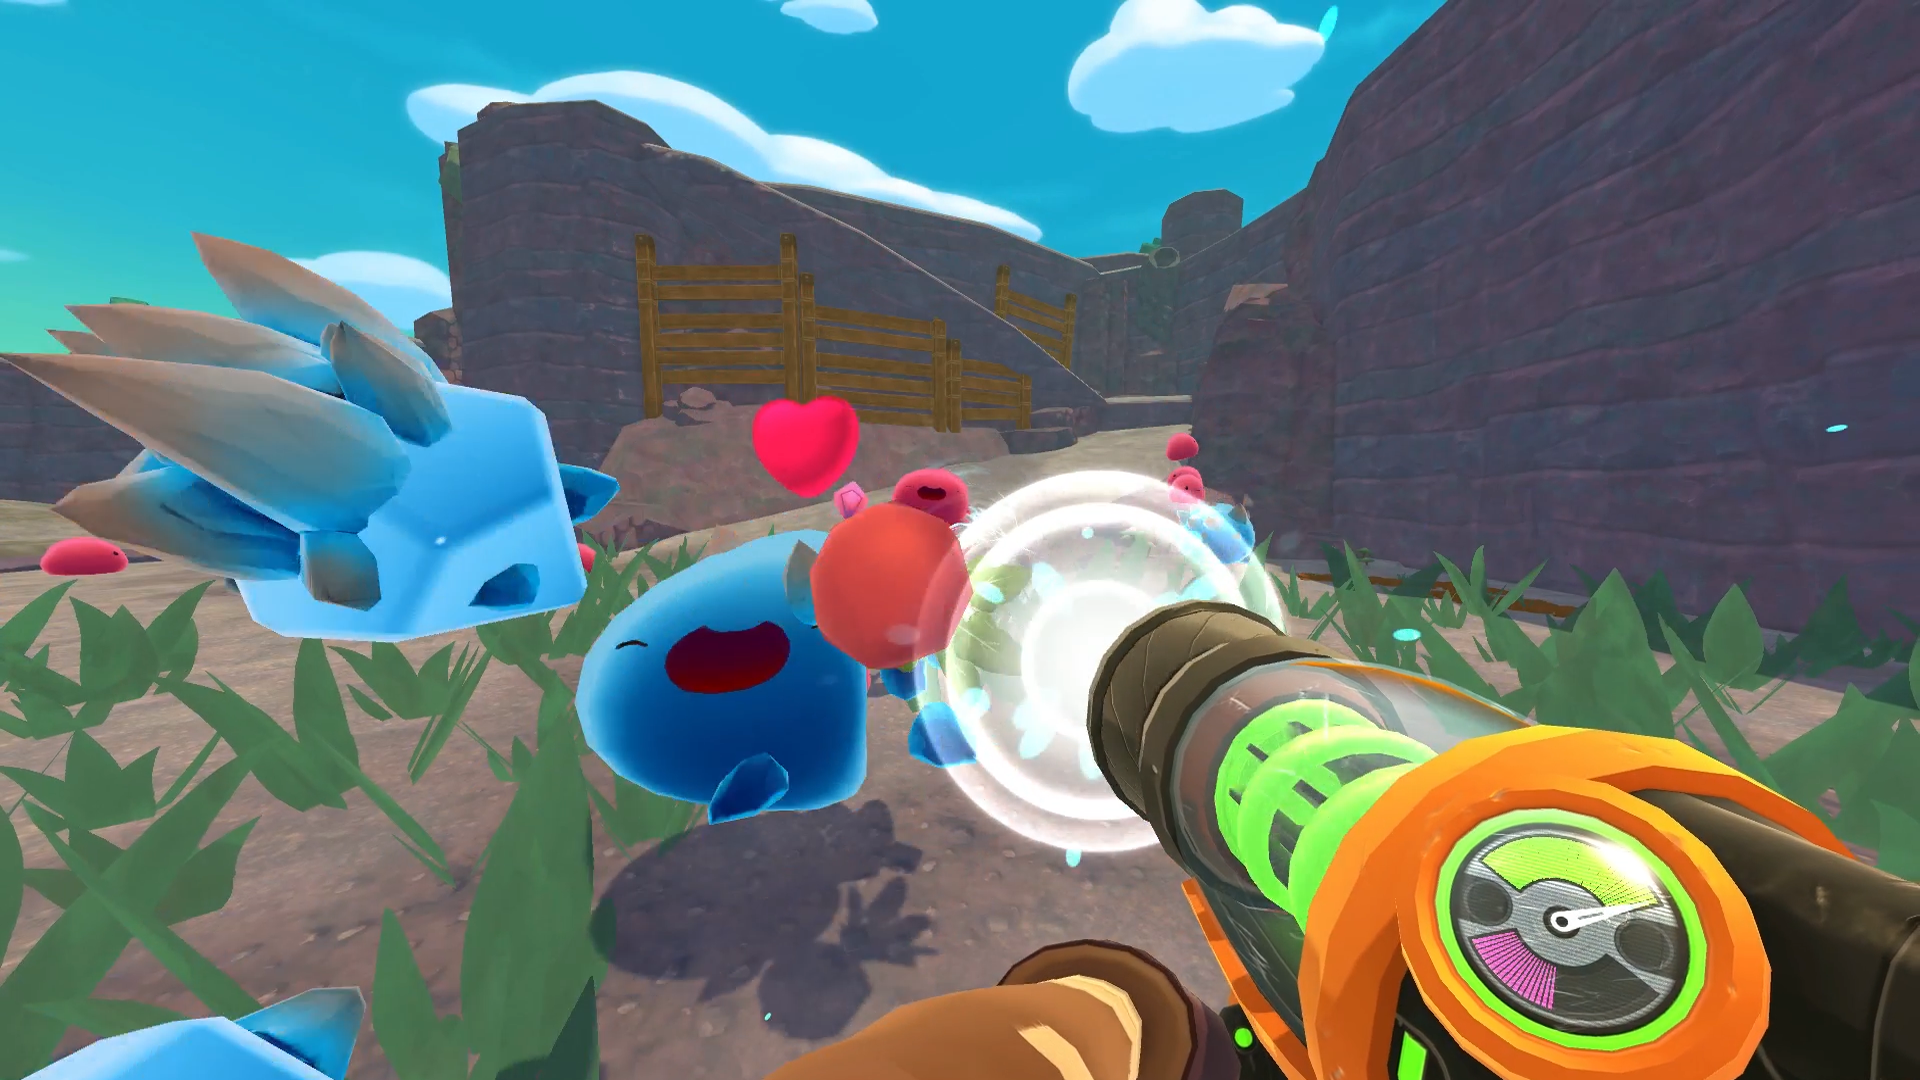 Pocket Wiki for Slime Rancher on the App Store